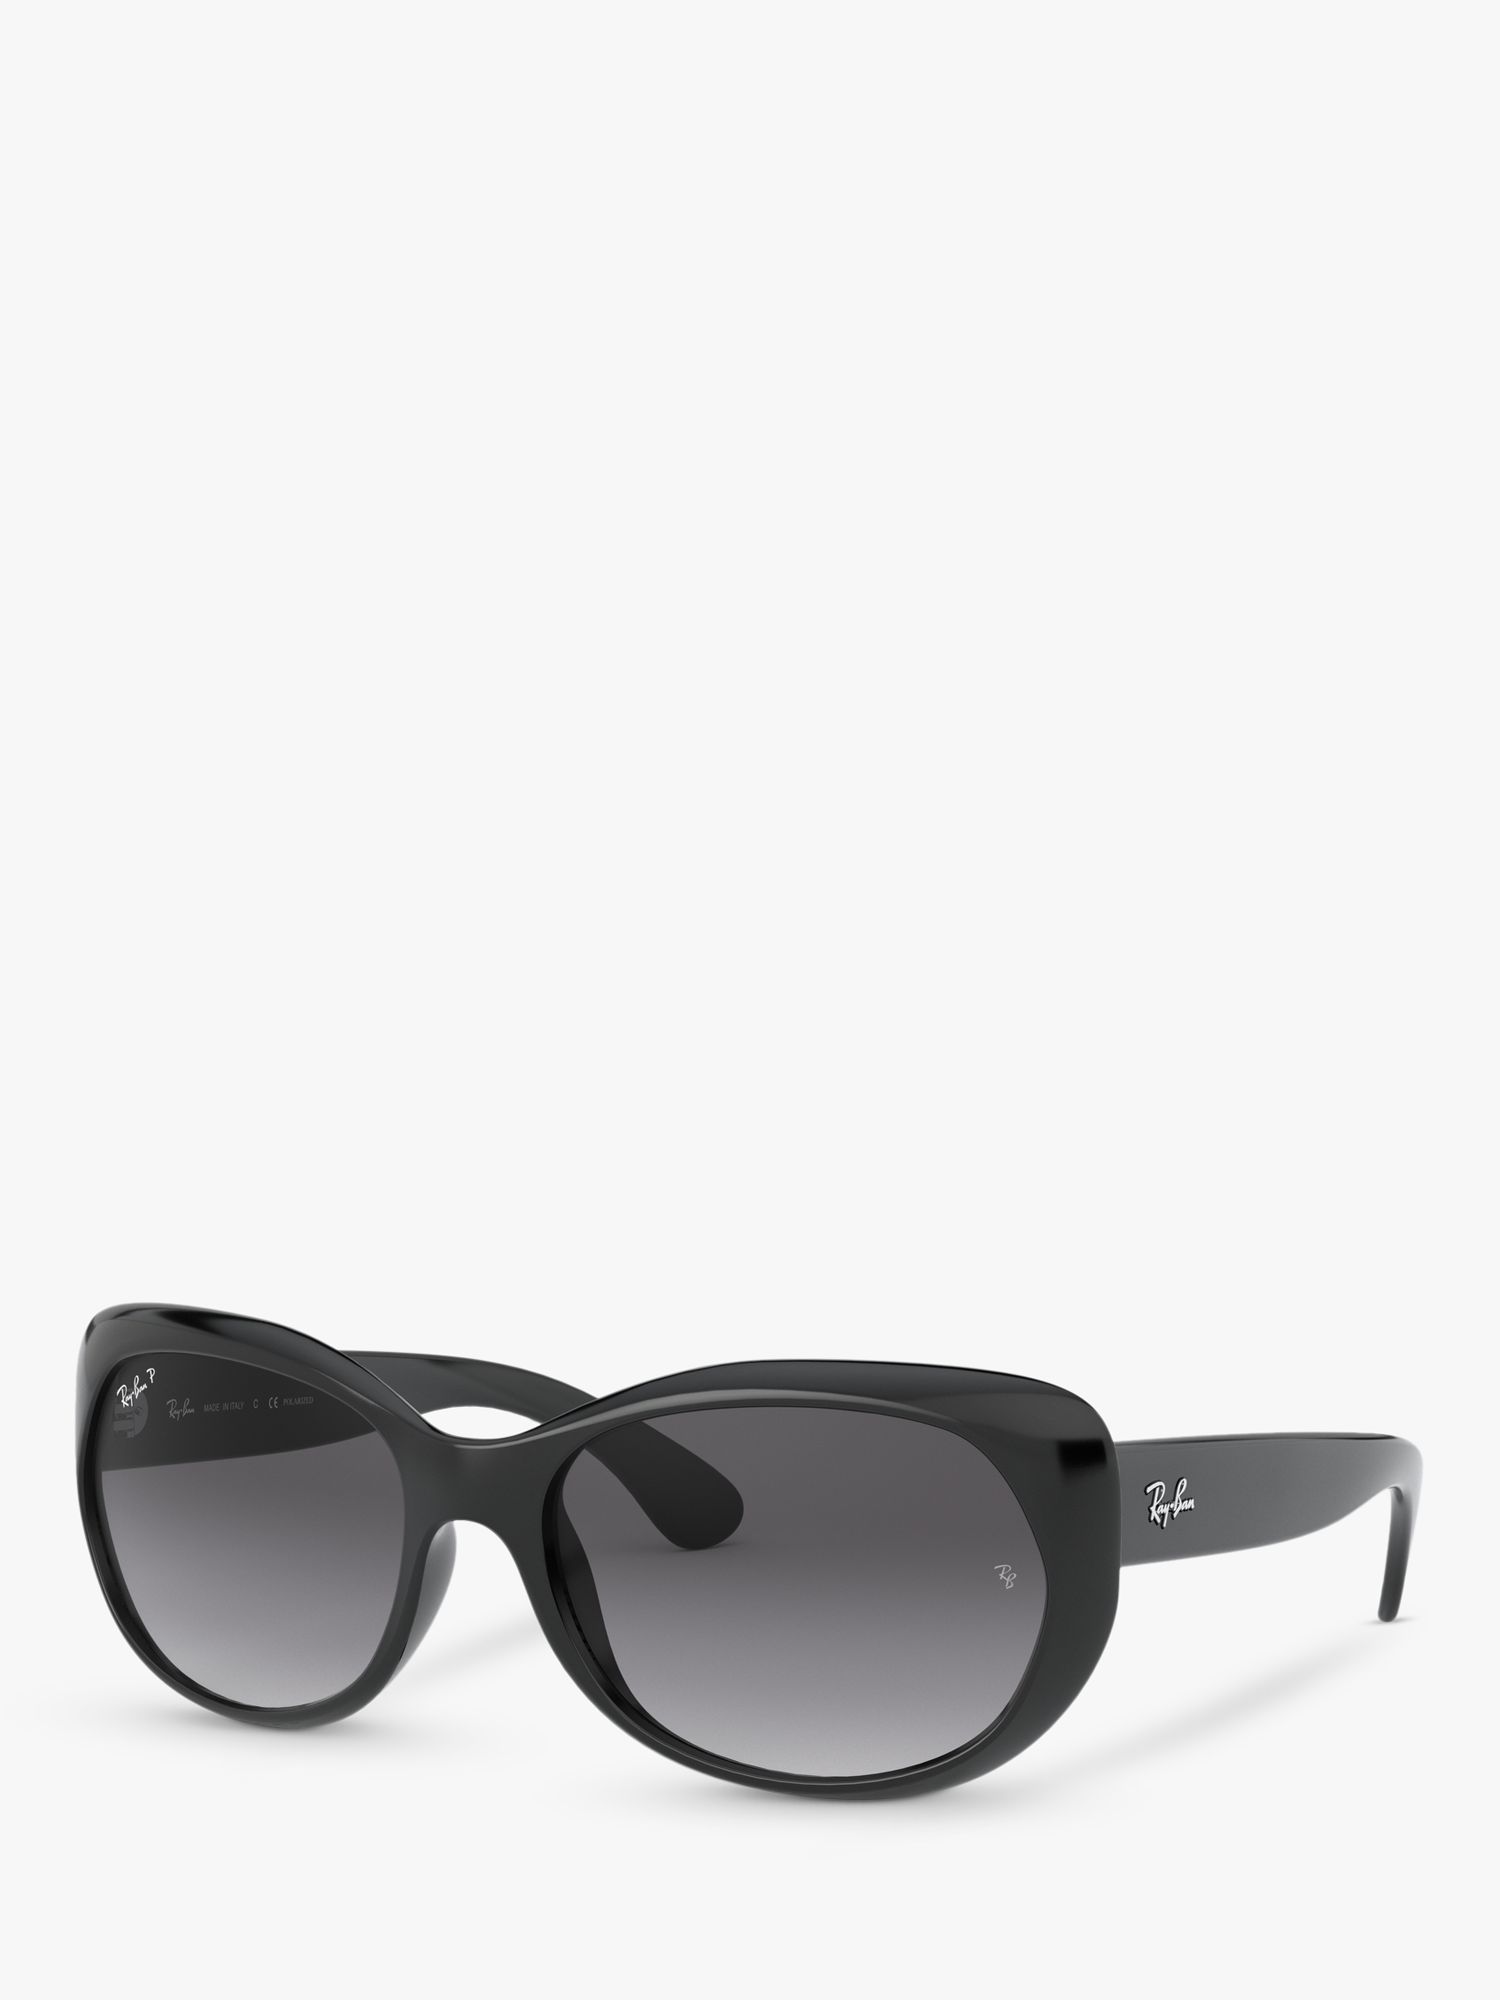 ray ban butterfly sunglasses